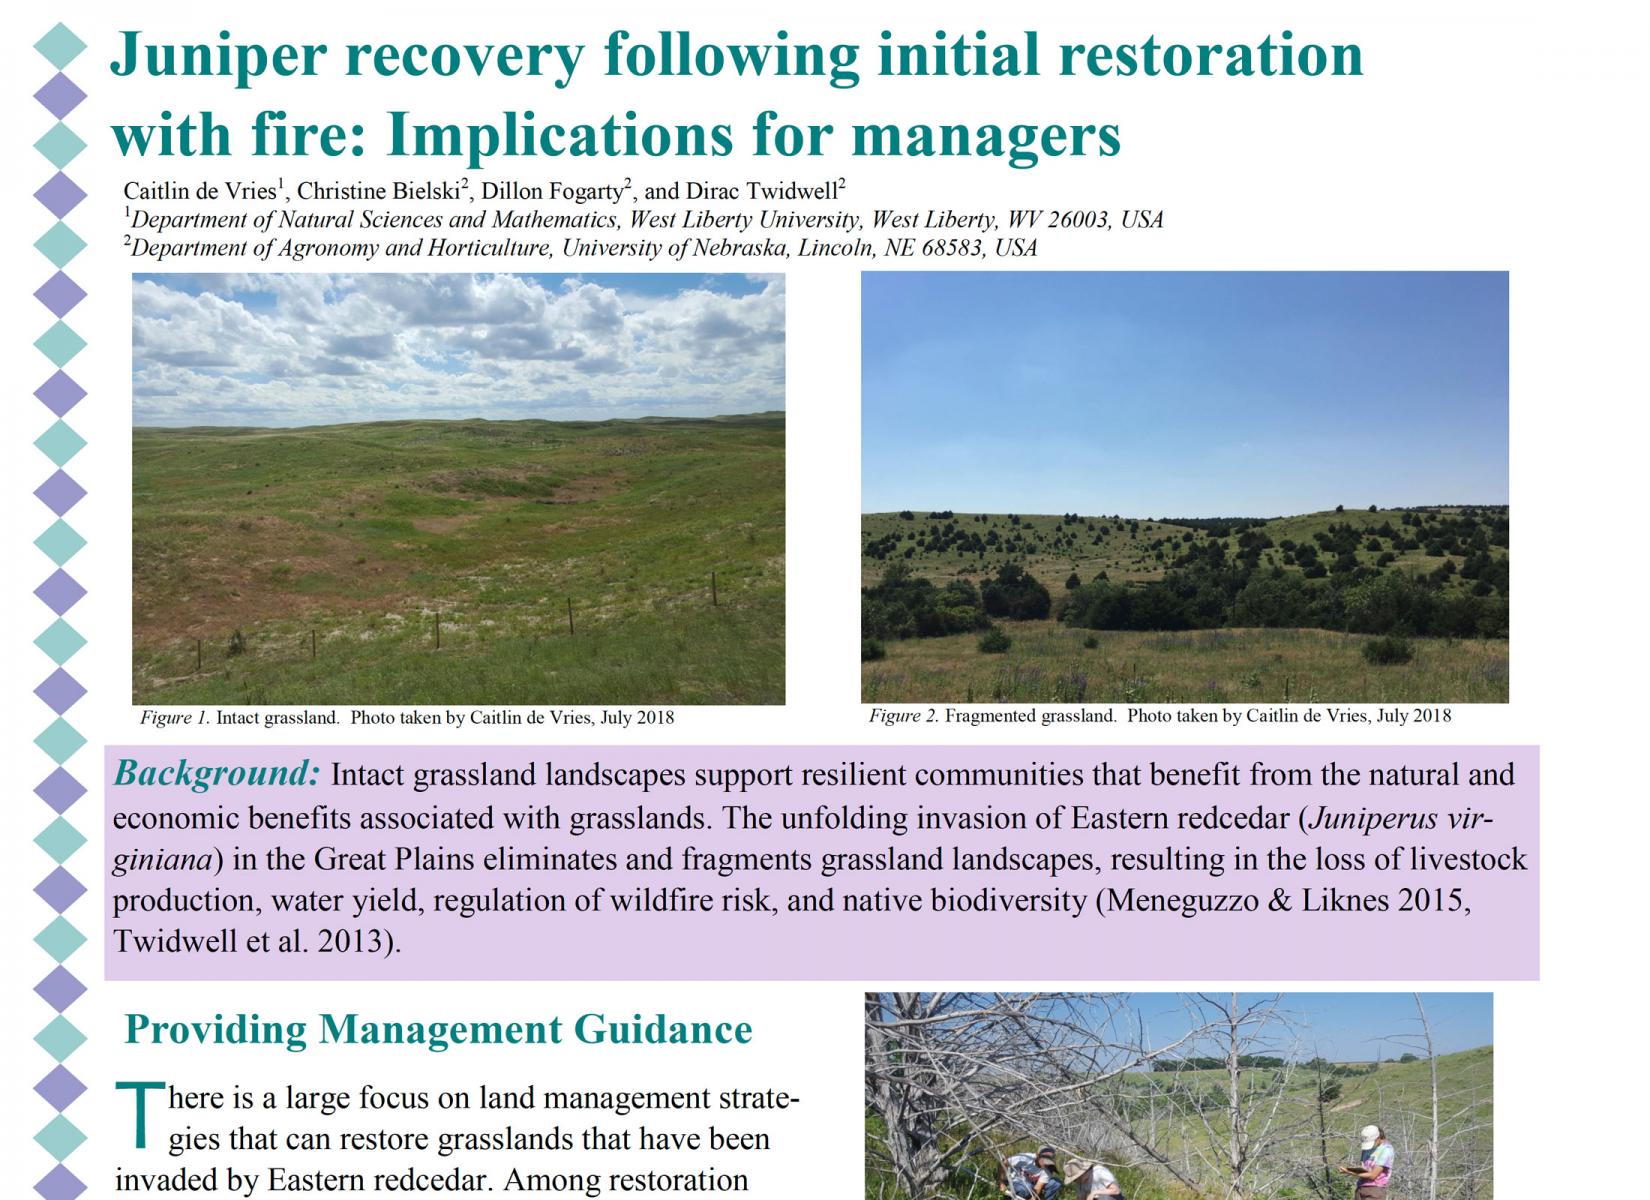 Juniper recovery following initial restoration with fire: Implications for managers poster